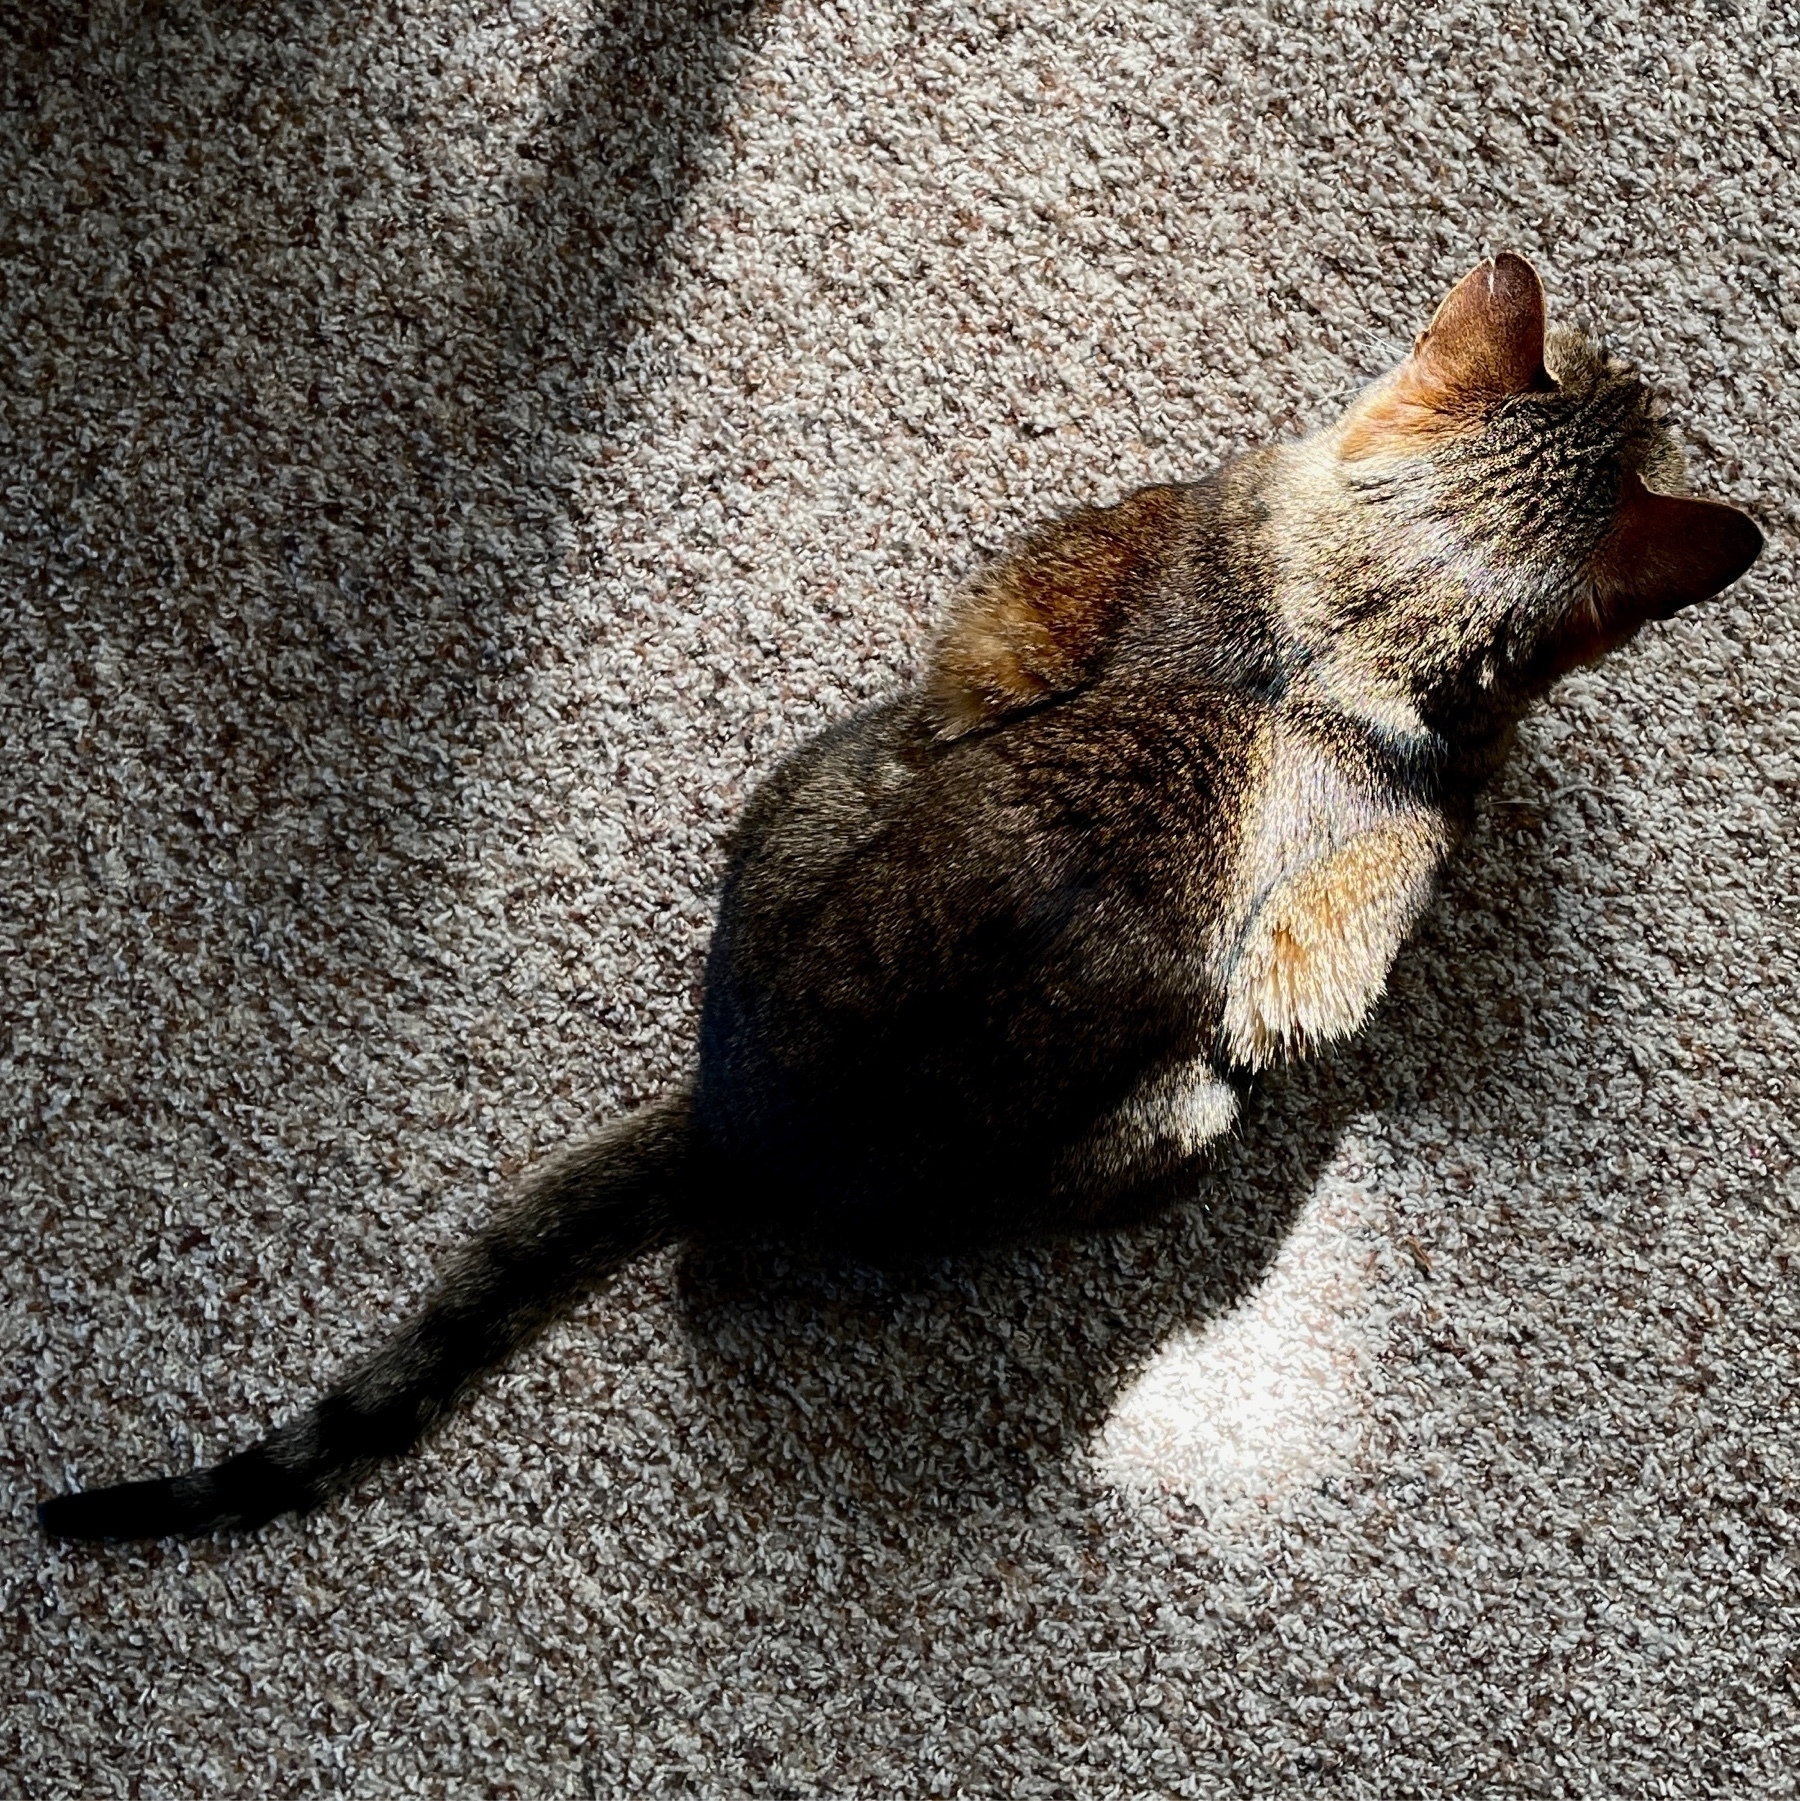 cat sitting on carpet in a small patch of sunlight